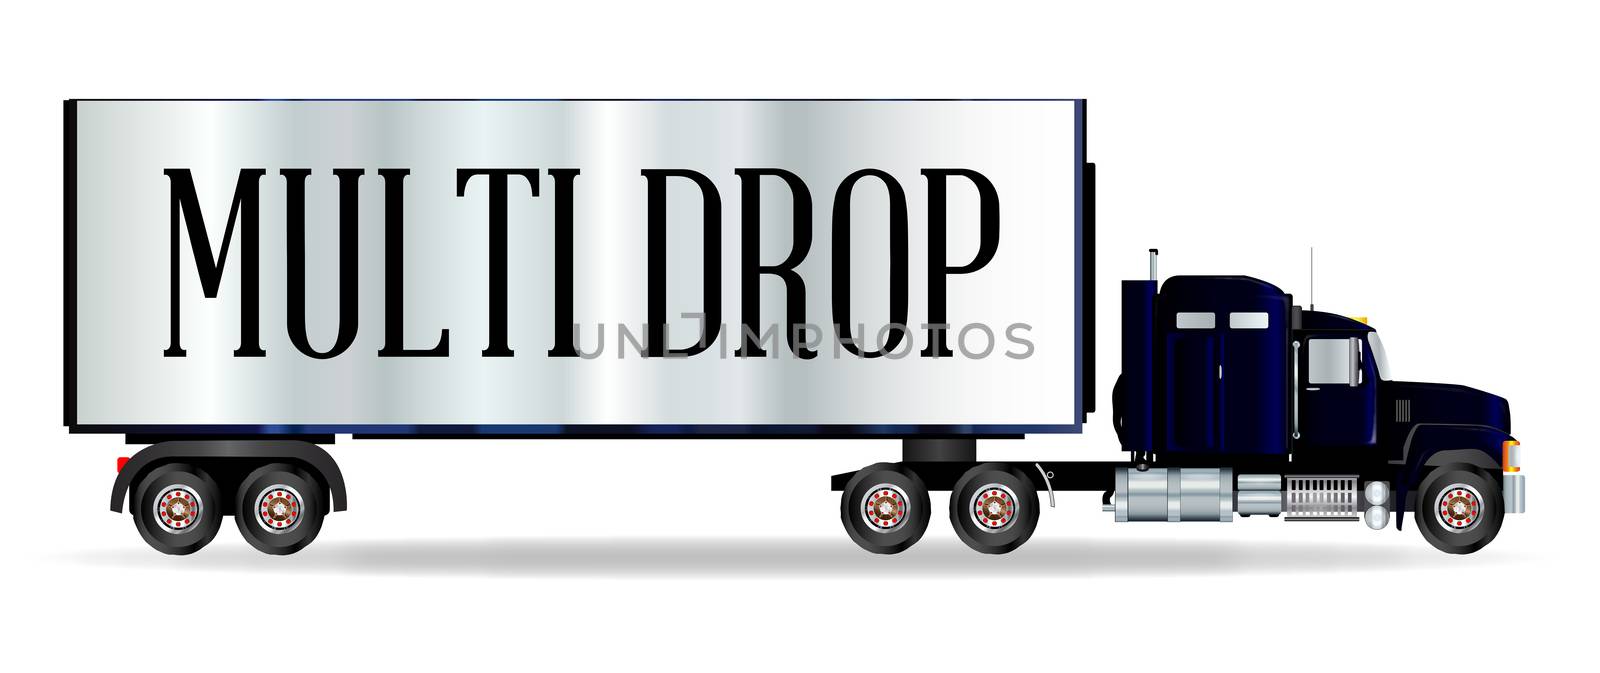 The front end of a large lorry over a white background with Multi Drop inscription